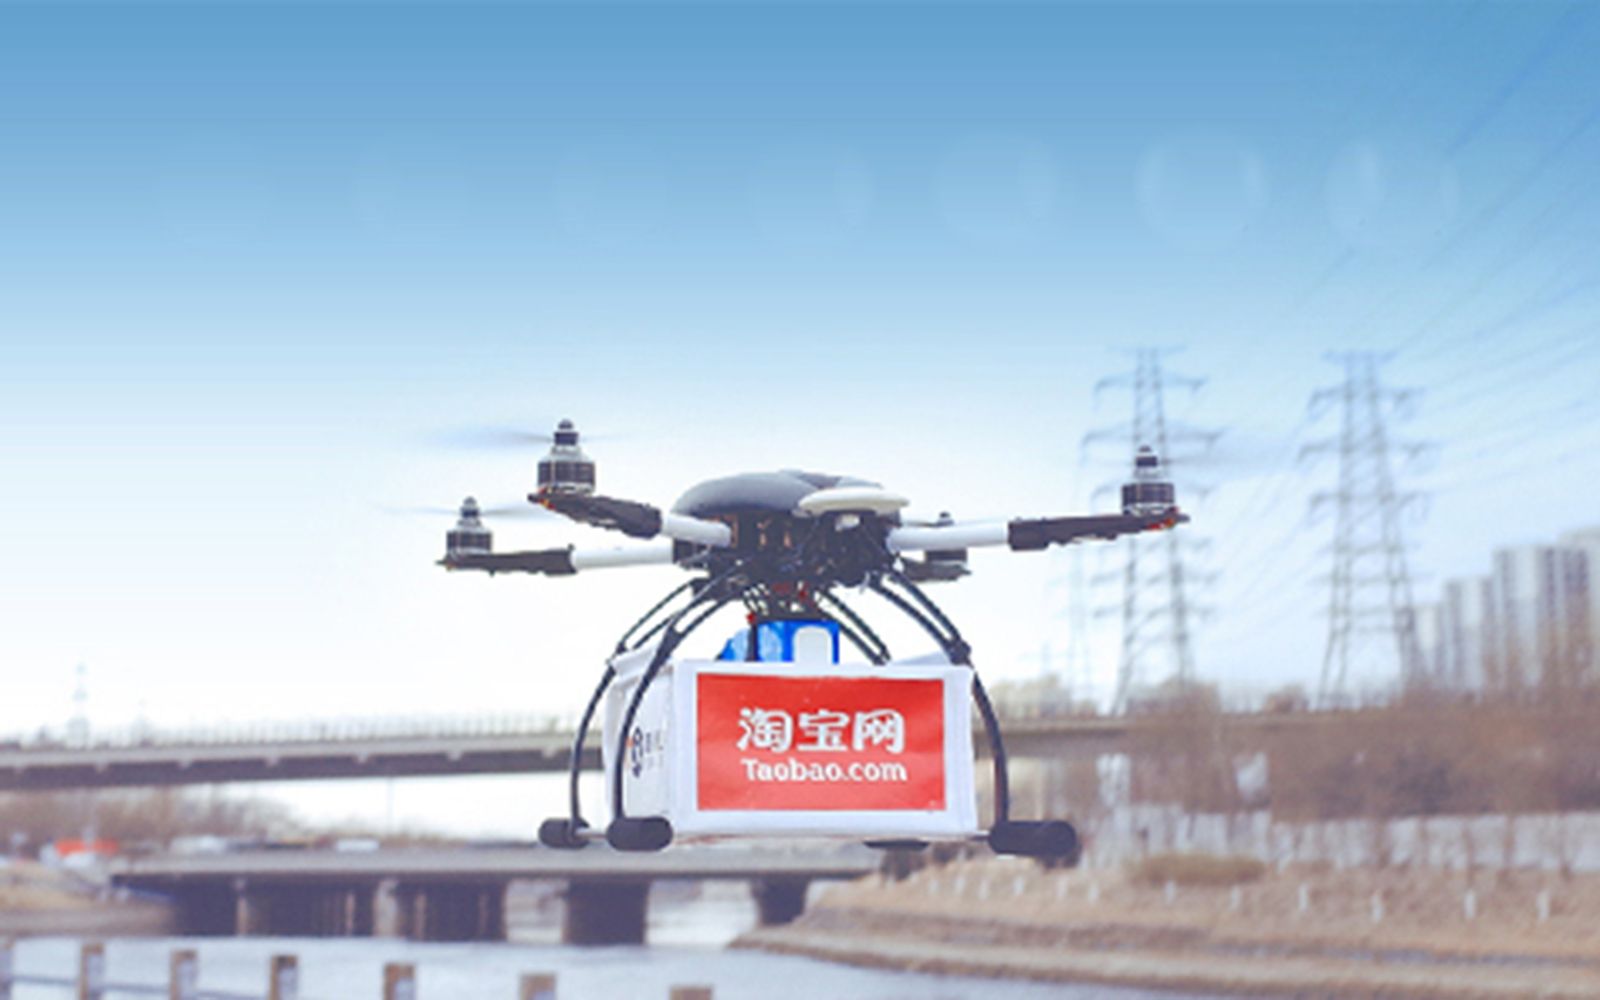 drone delivery starts today receive package within an hour of order image 1